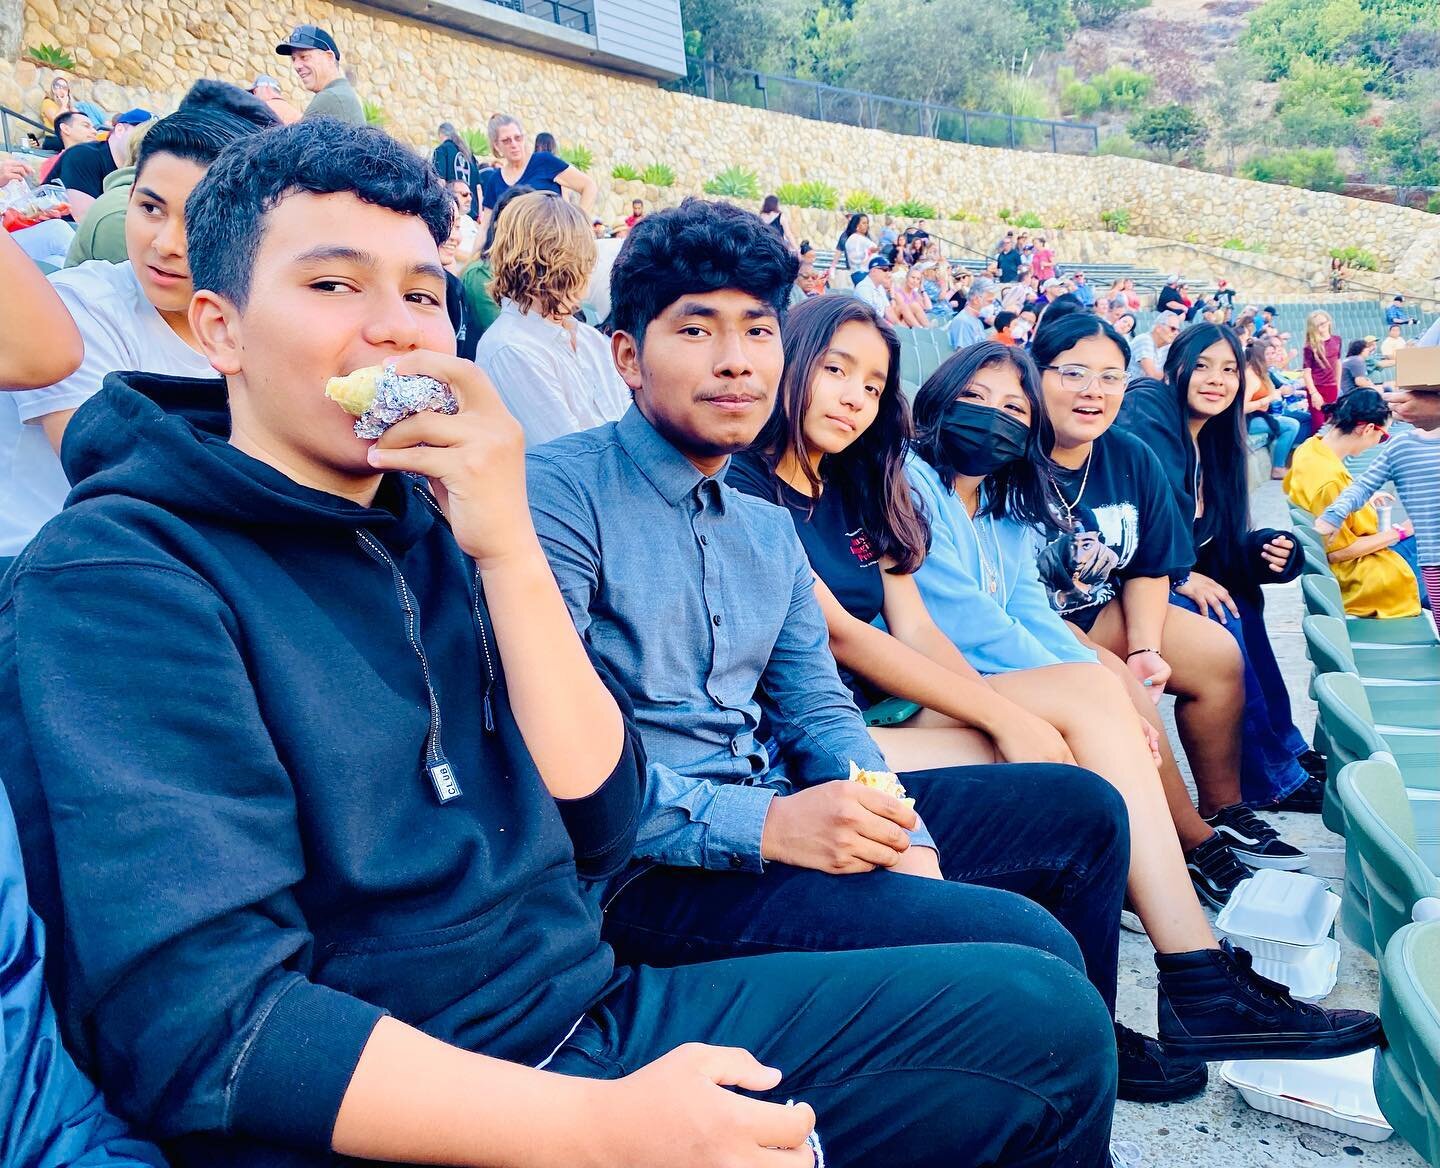 CELEBRATING THE END OF SUMMER!
Thank you @sbbowl and The Bentson Foundation for facilitating an exclusive backstage tour where we were able to meet the members of @thesoulrebels , @dumpstaphunk , and @tromboneshorty !!! We&rsquo;d also like to thank 